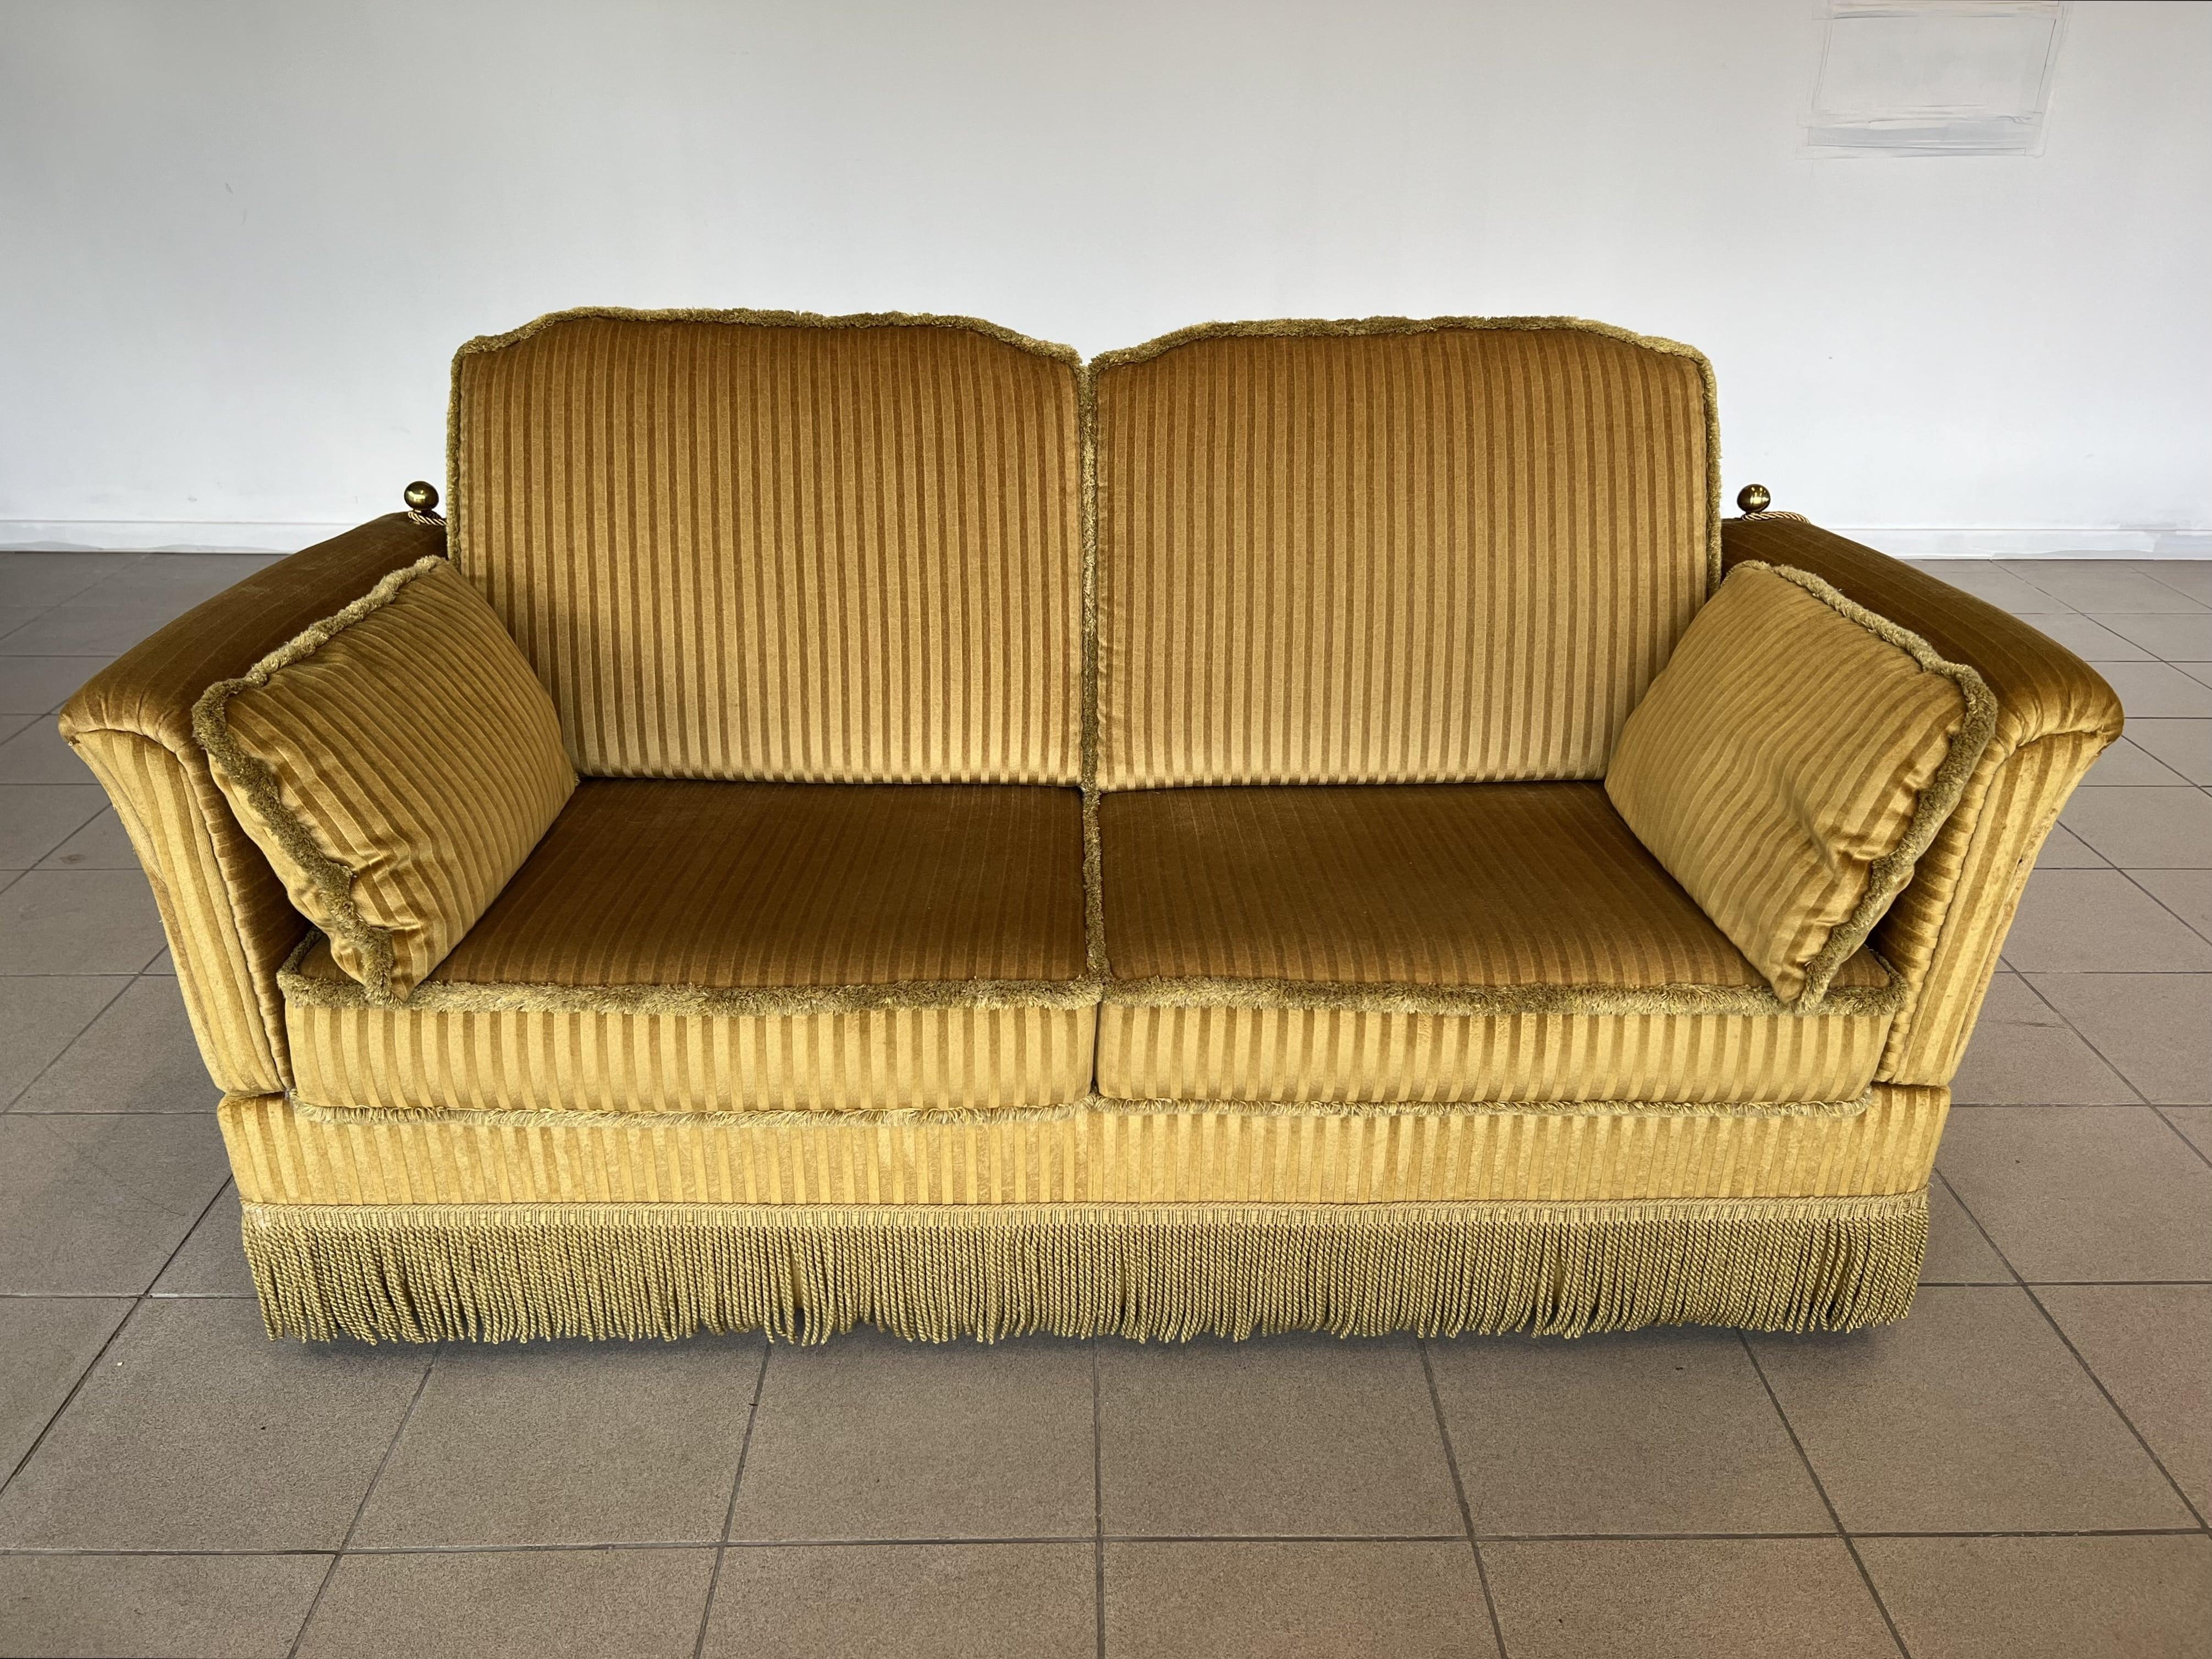 European Vintage Art Deco Styled Adjustable Sofa Bed With Cushions and Fringes For Sale